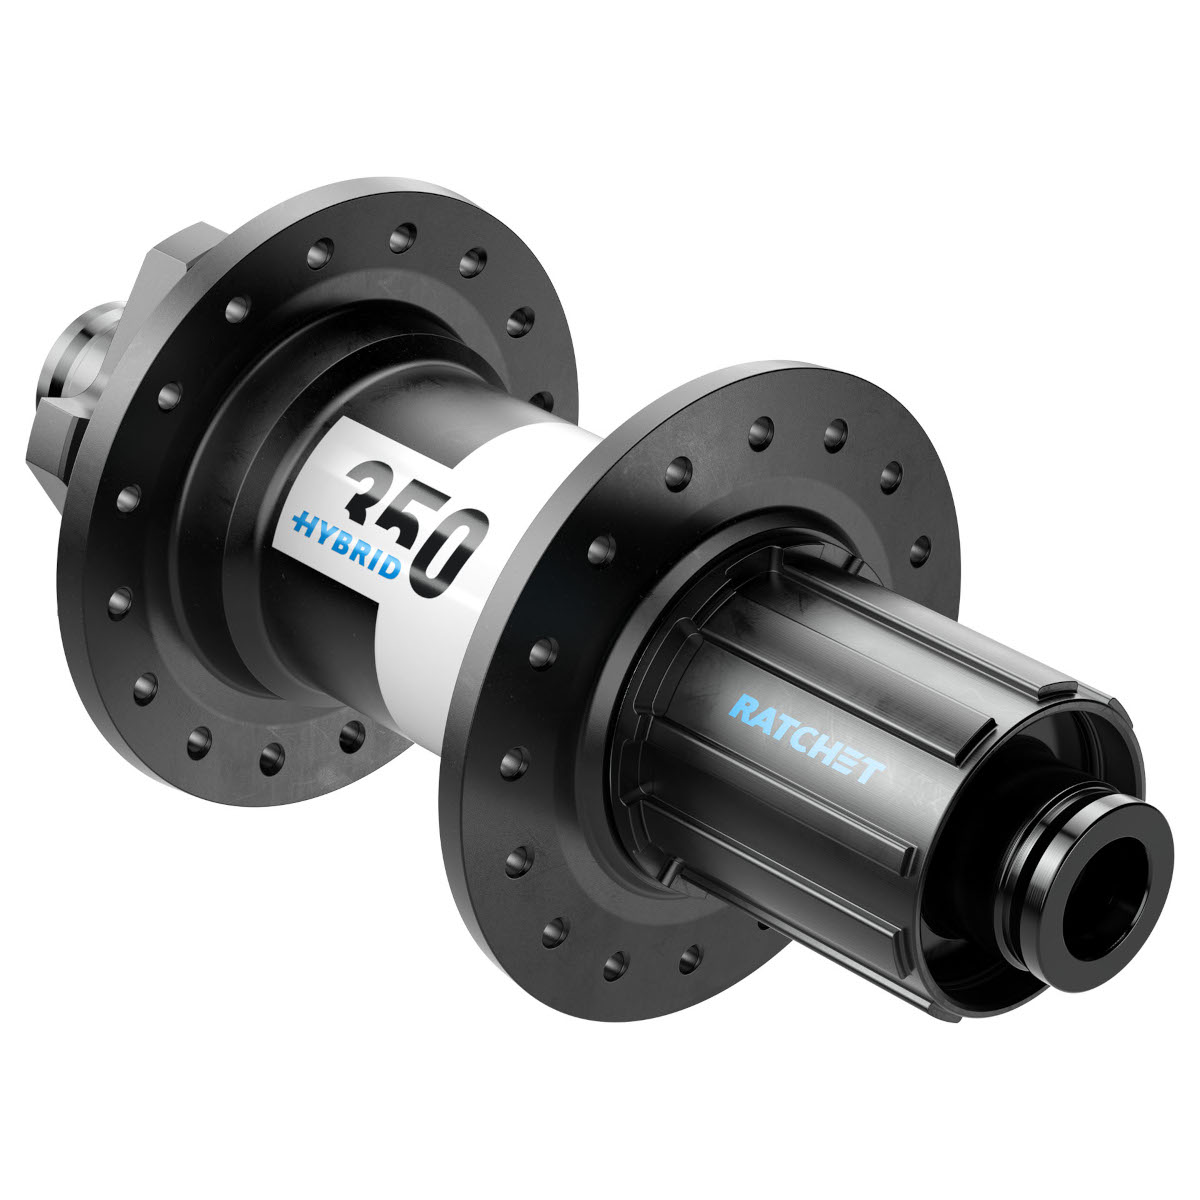 Picture of DT Swiss 350 Hybrid Rear Hub - 6-Bolt | 12x148mm Boost - Shimano HG